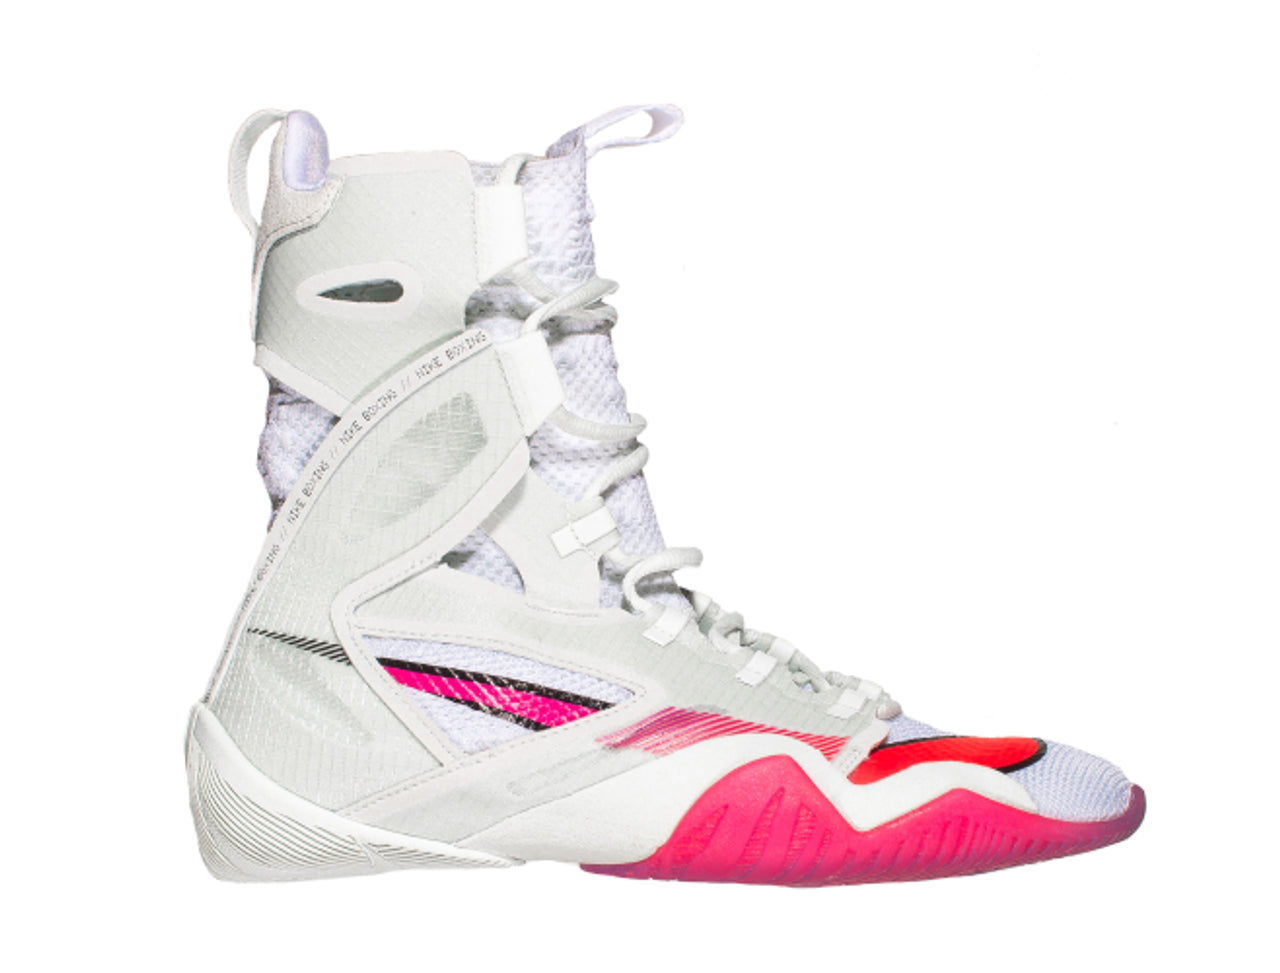 NIKE HYPERKO 2 SPECIAL LIMITED EDITION - Olympic Version! WHITE/HYPER VIOLET/LIGHT